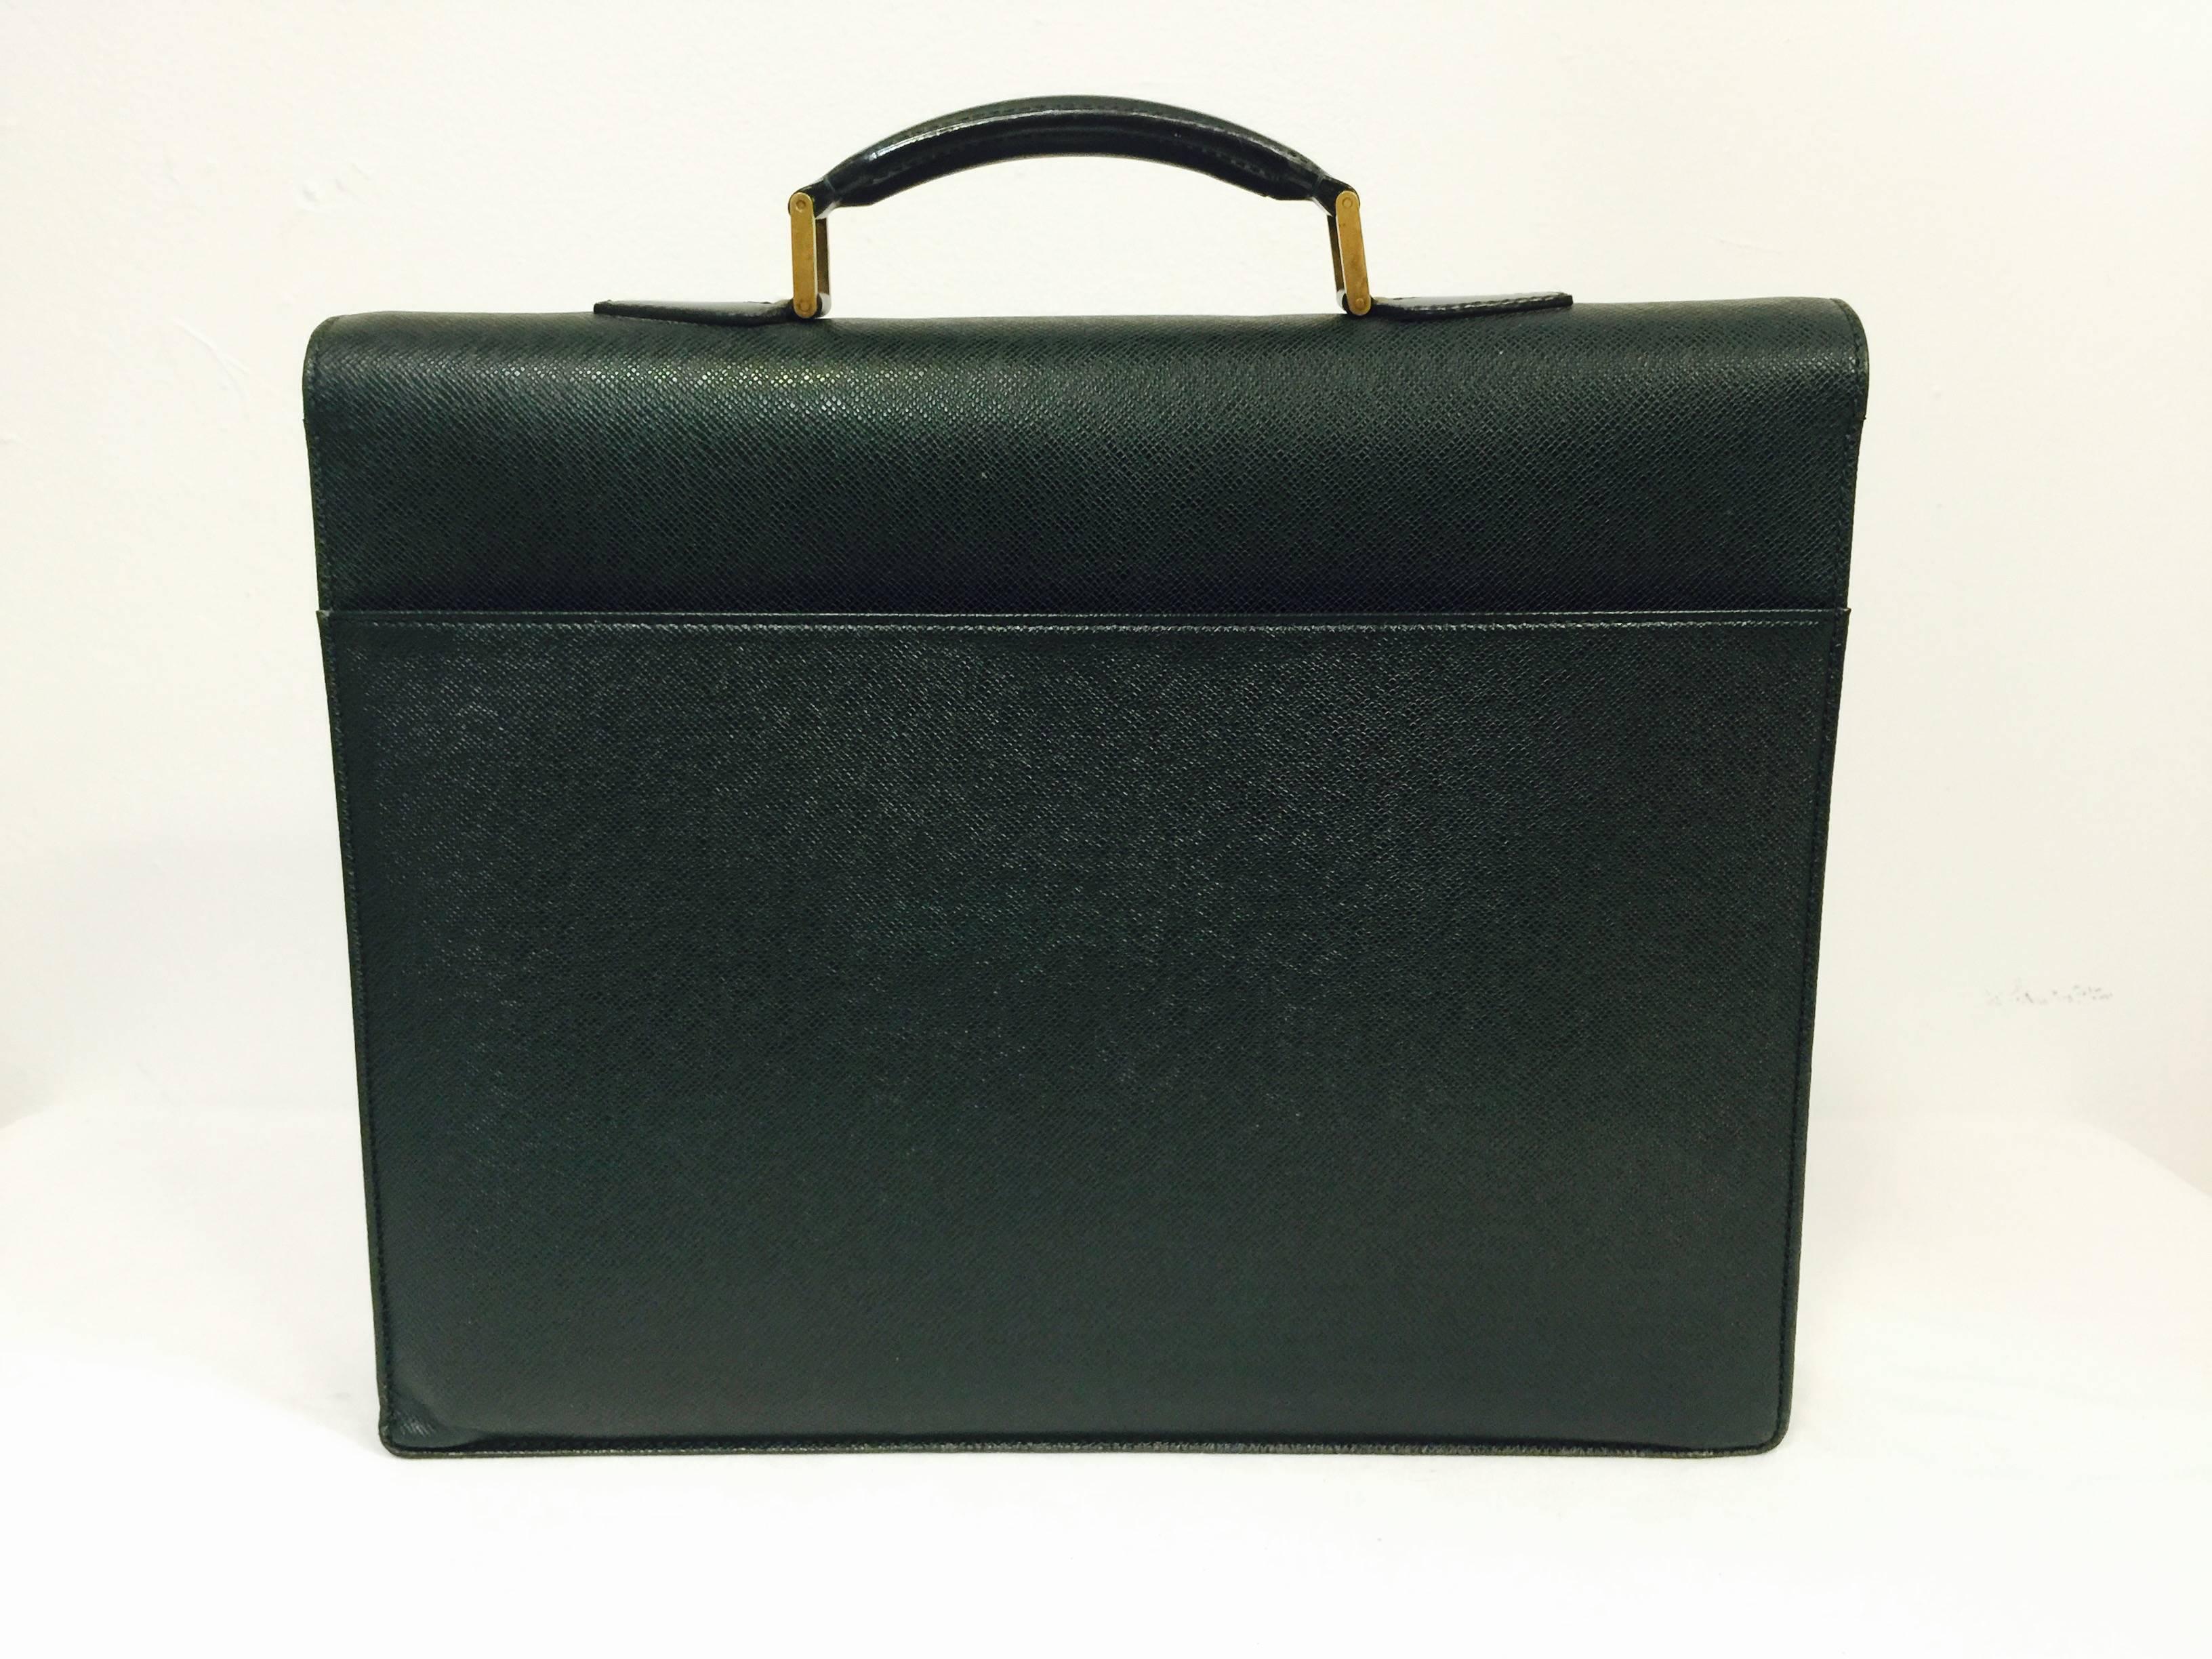 Louis Vuitton Moskova Briefcase With Legal Pad Cover and Pen Case is a must for any professional!  Includes not only the celebrated Moskova Briefcase in deep forest green Taiga leather, but also a legal pad cover, pen case and pochette!  More than a